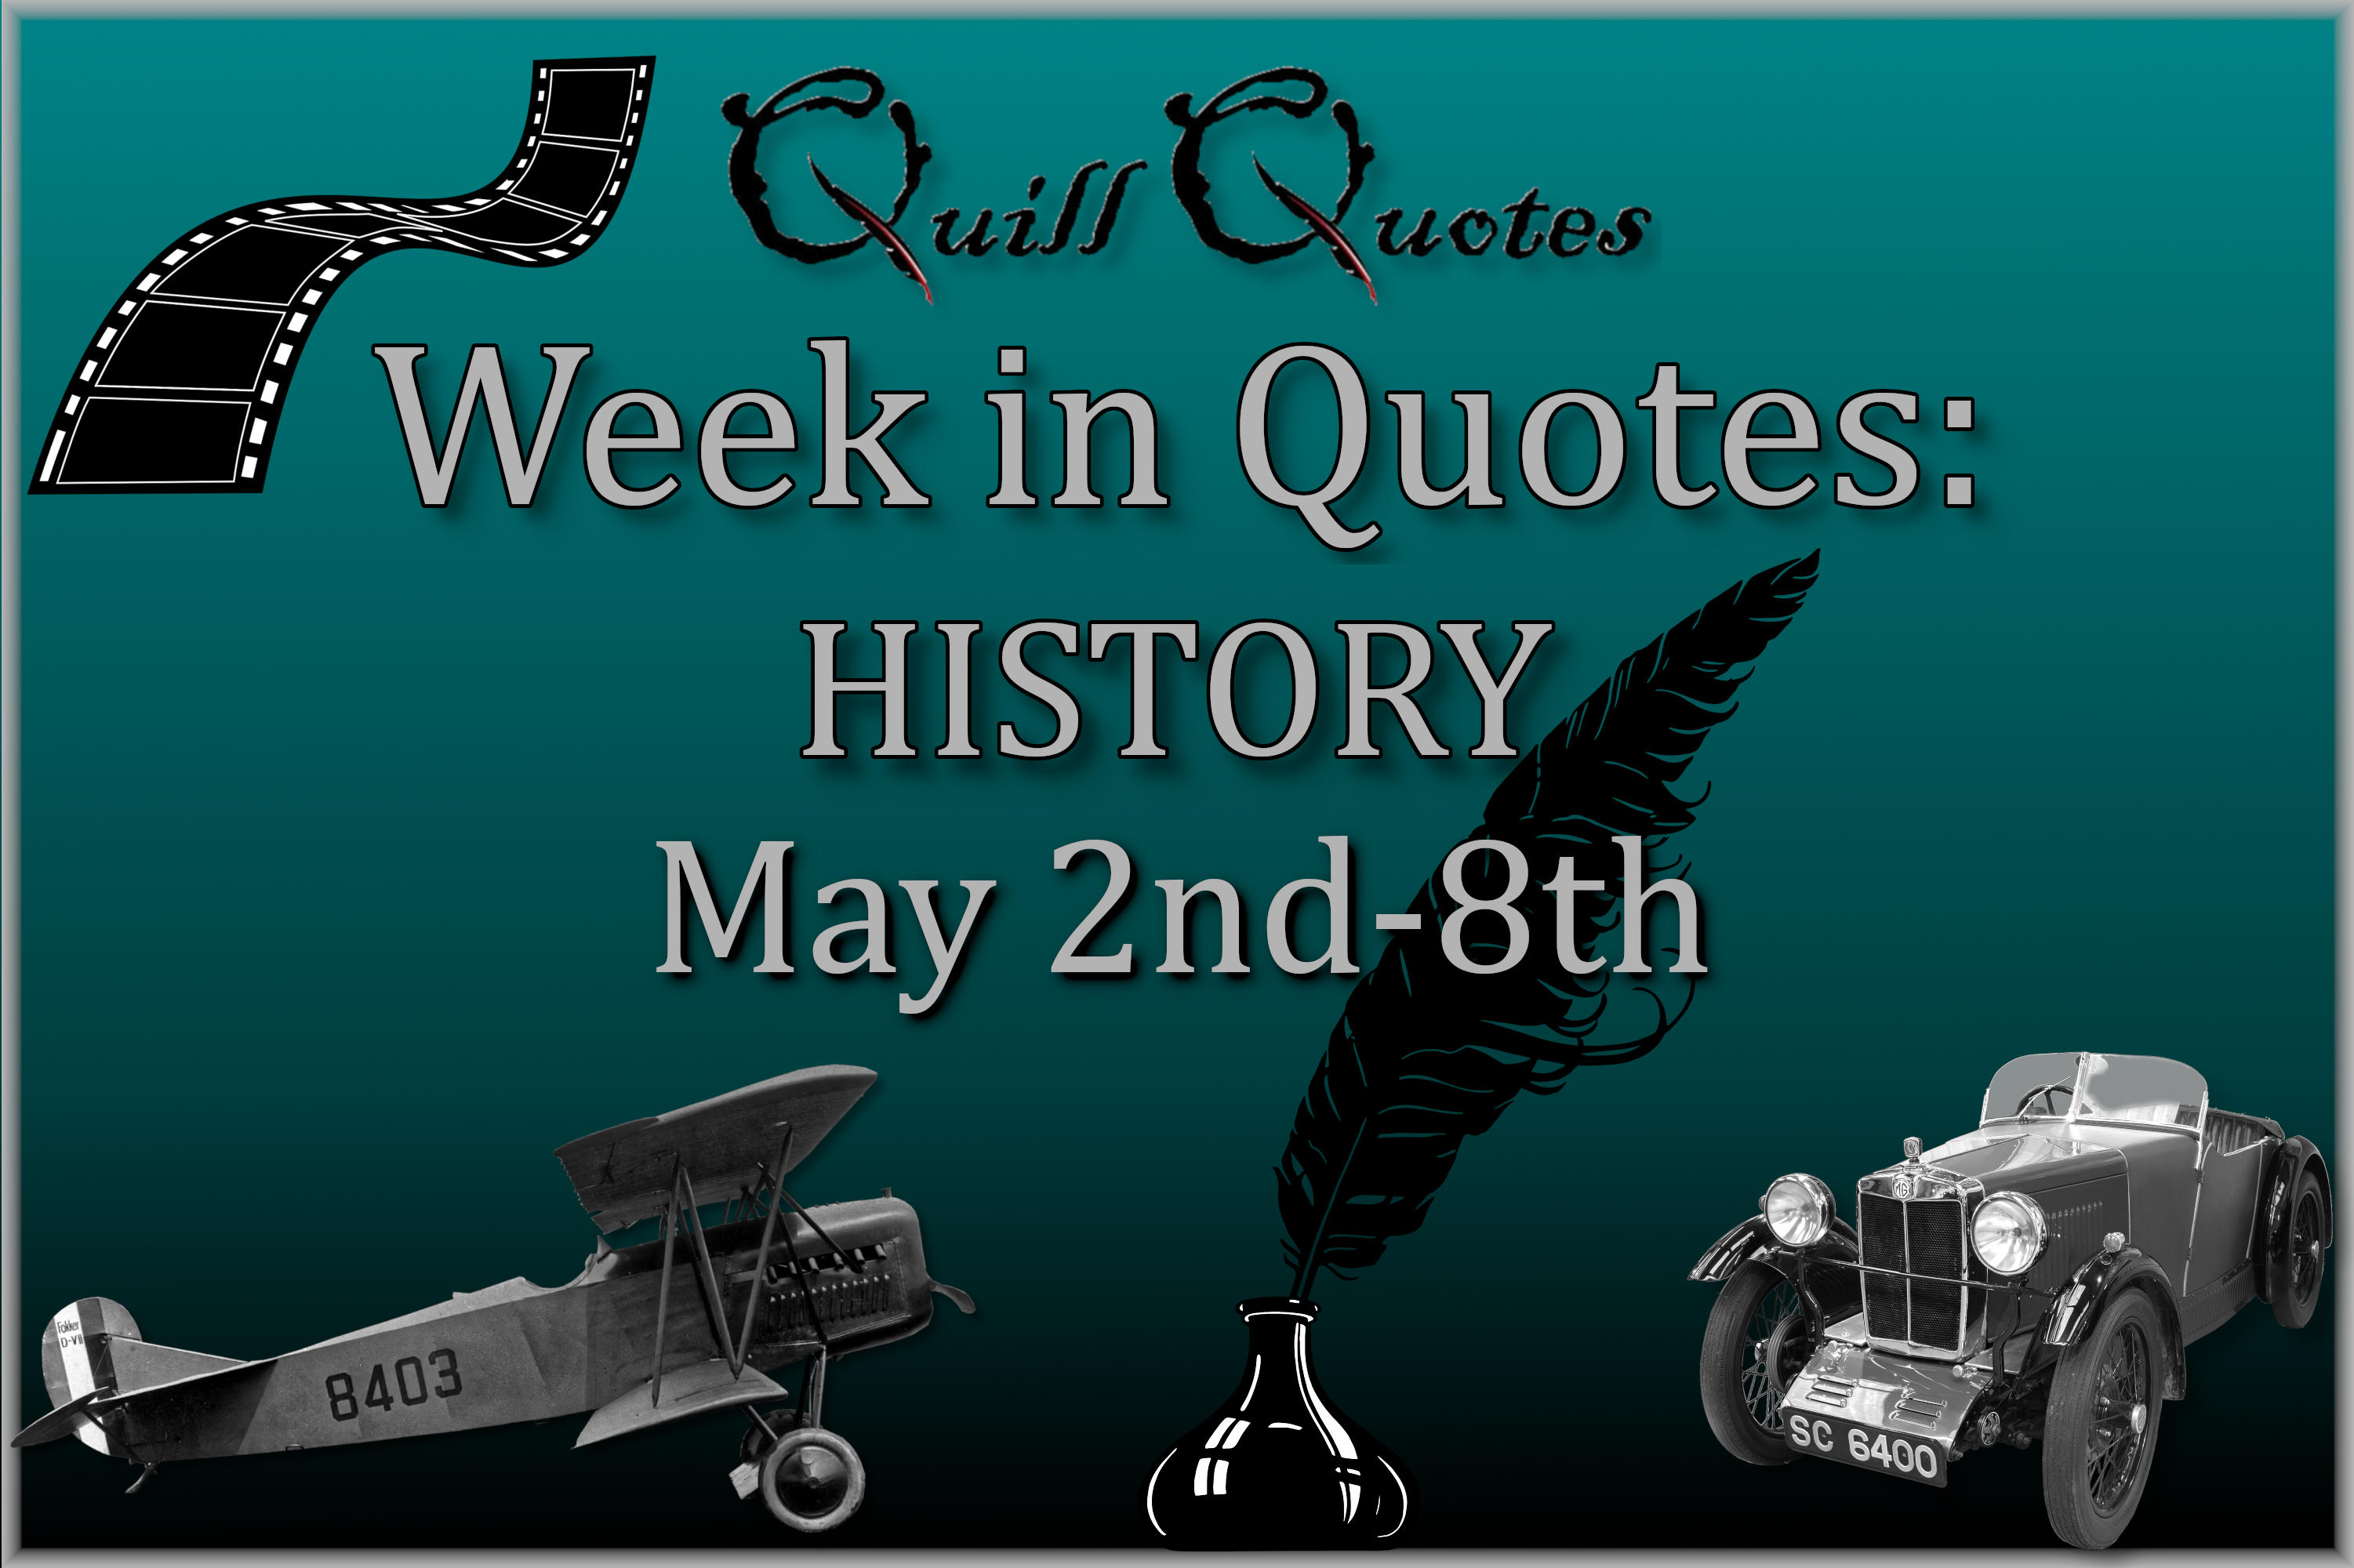 Quill Quotes Week in Quotes: HISTORY May 2nd - 8th